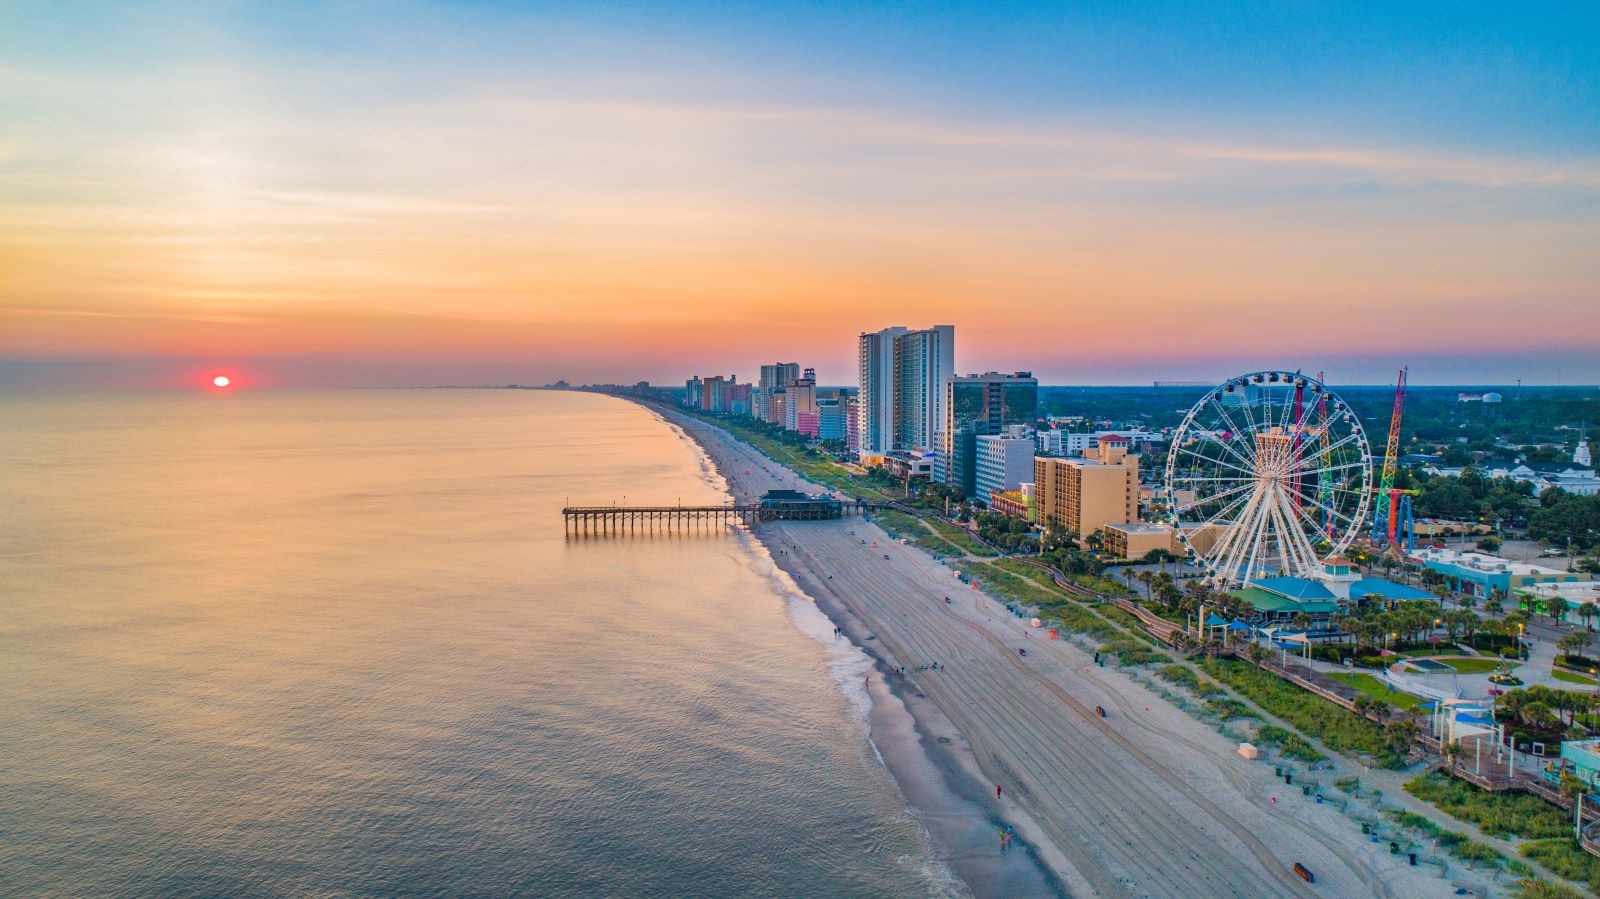 May Weather In Myrtle Beach: What To Expect